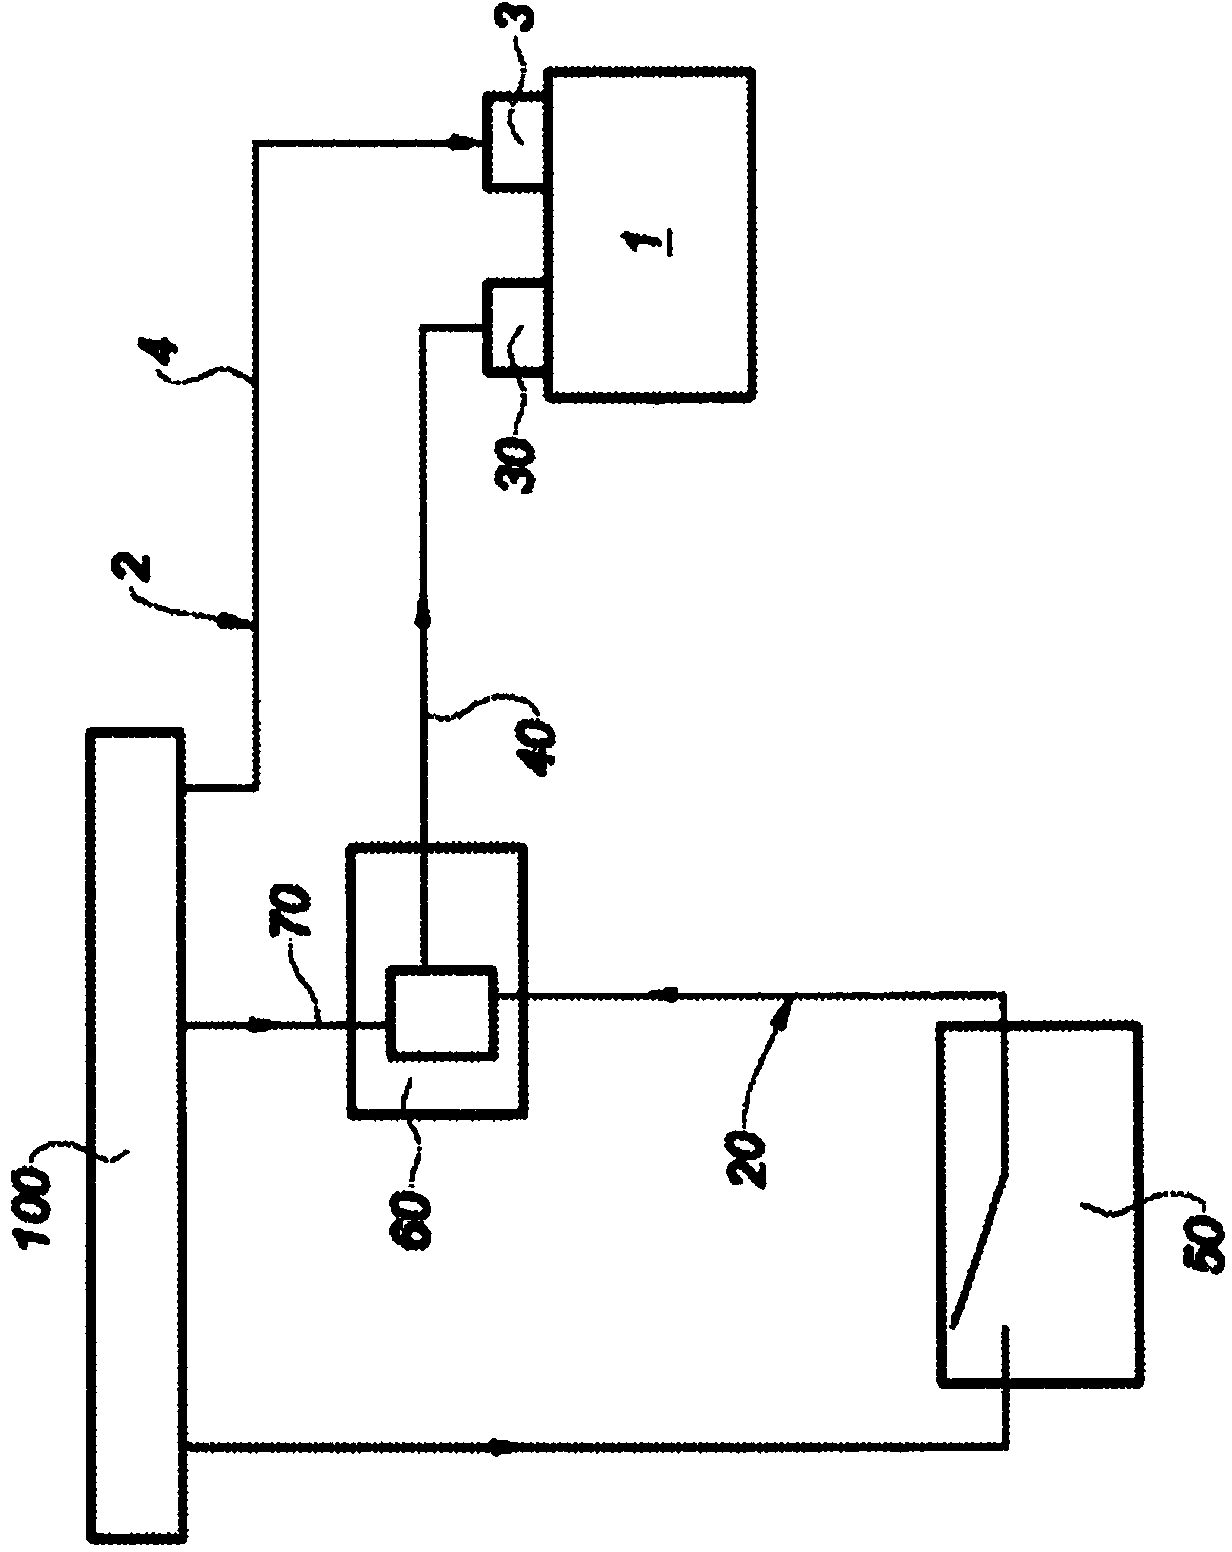 Tertiary locking assembly for a thrust reverser